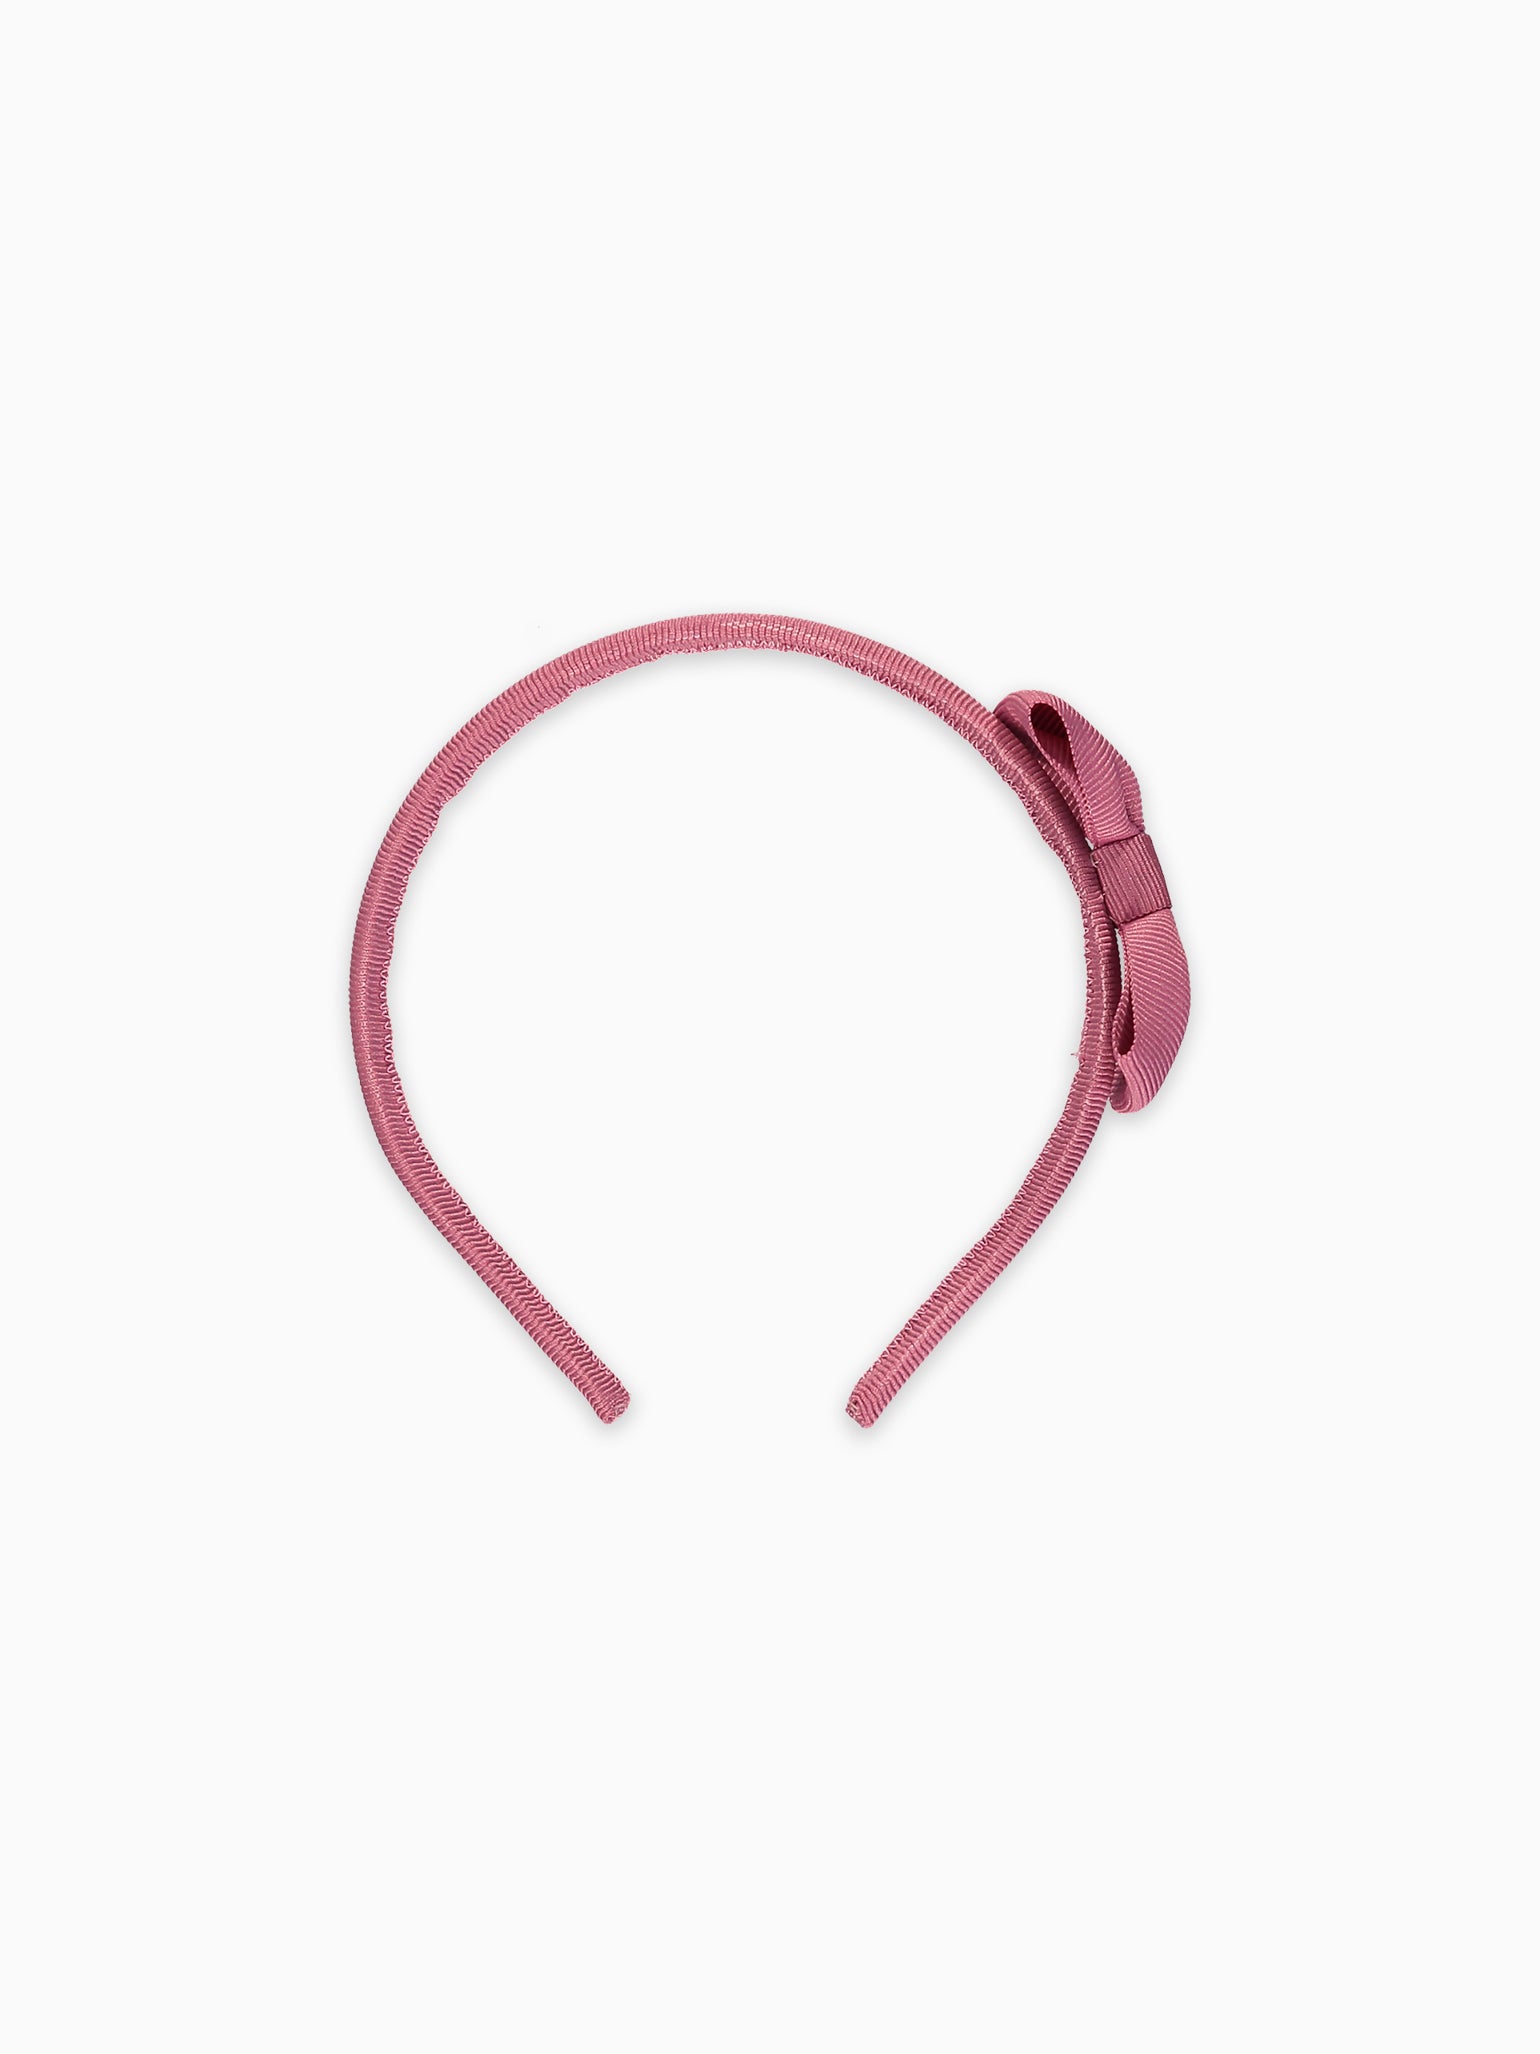 Dusty Pink Small Bow Girl Hairband